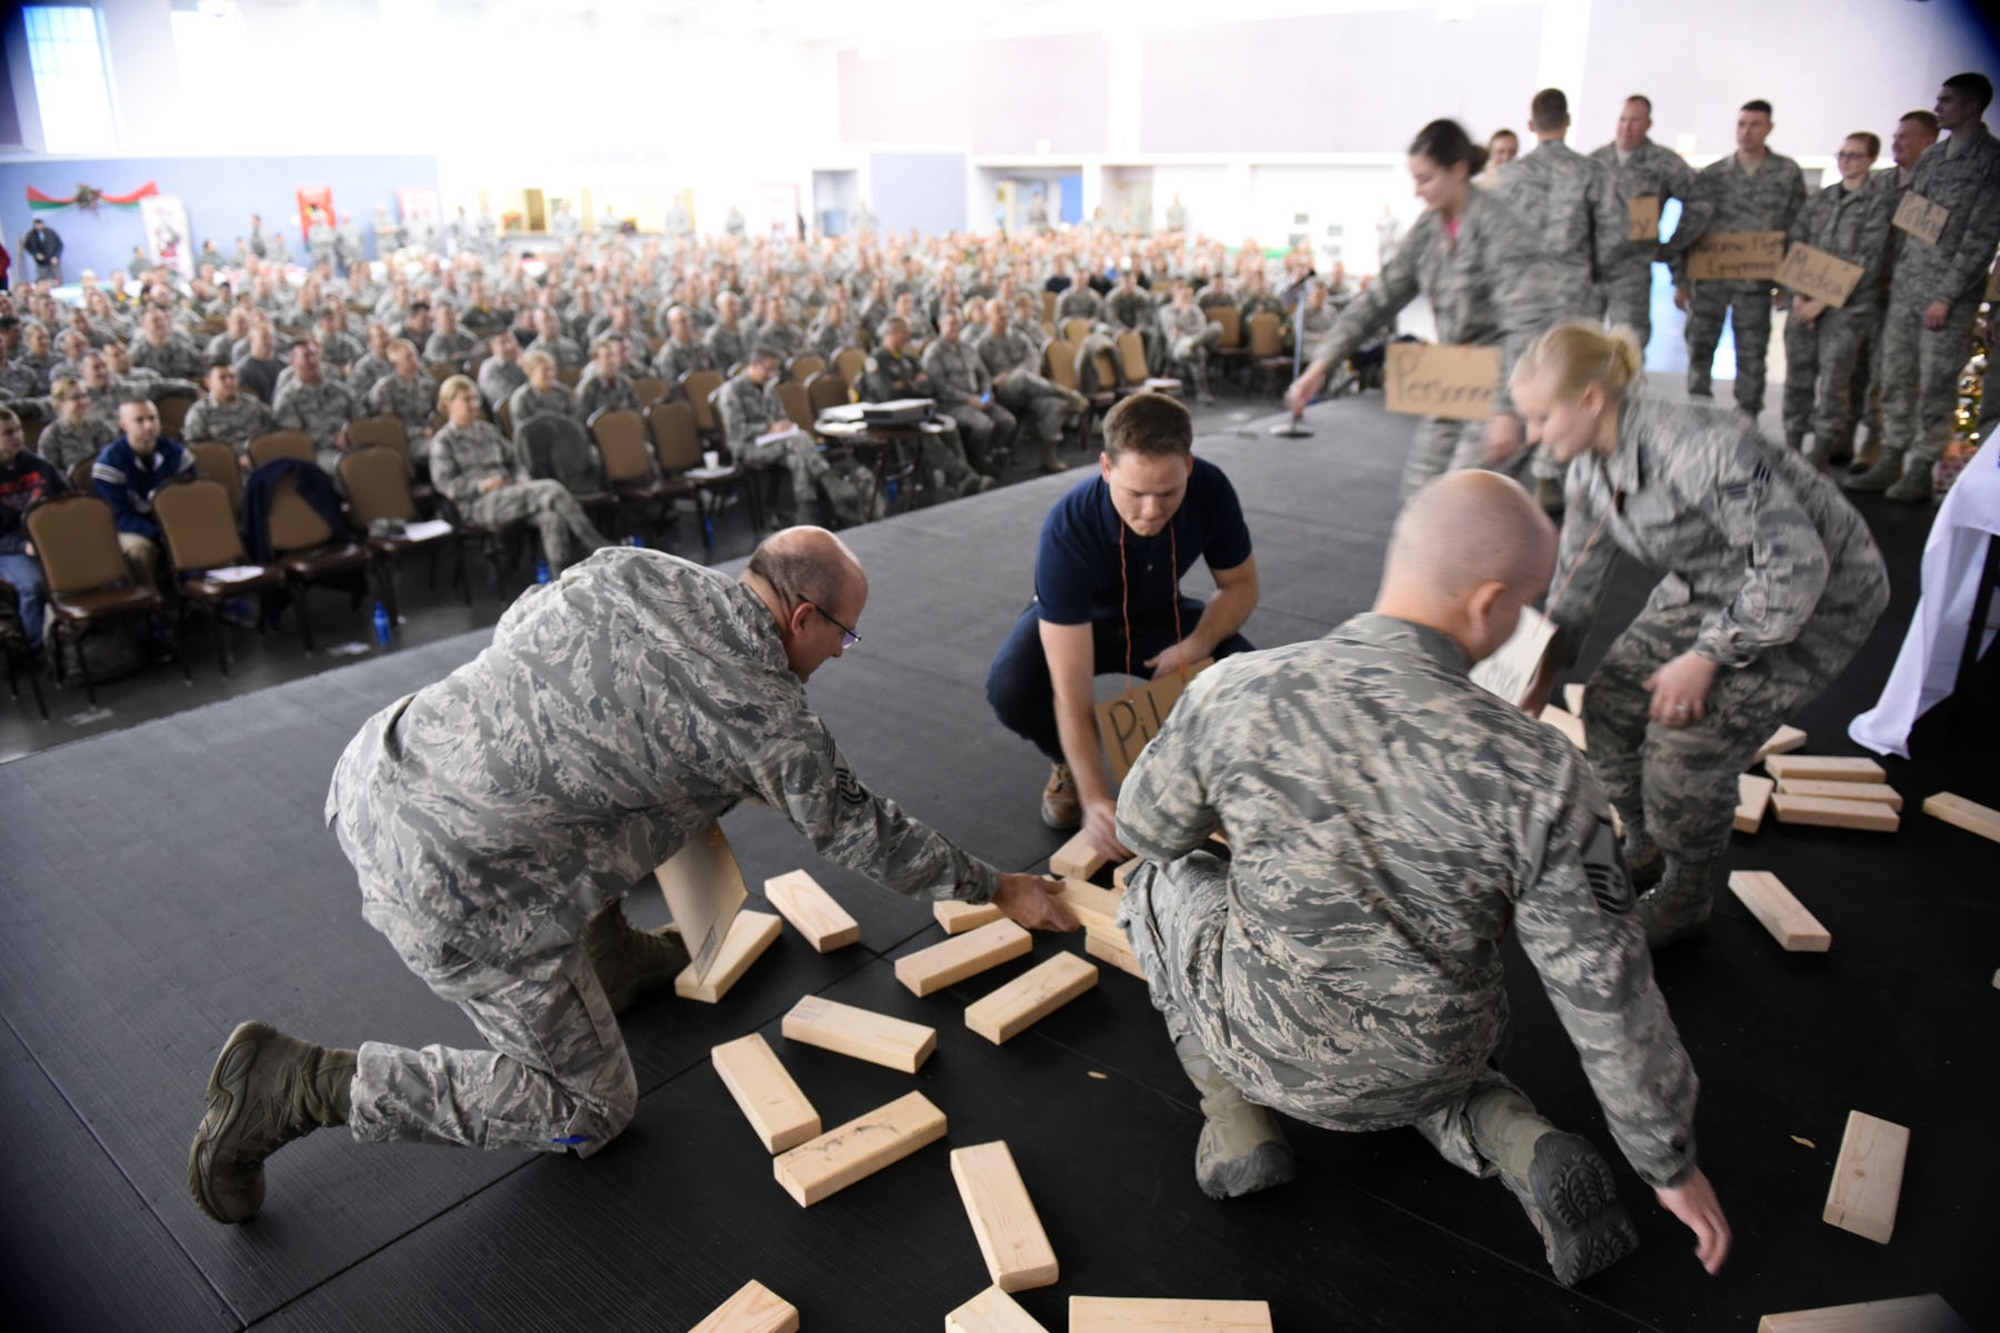 Chief Master Sgt. Pat Halko lends a hand to Guardsmen during a skit performed during the 120th Airlift Wing’s Wingman Day event December 3, 2016 at the Mansfield Center in Great Falls, Montana. The skit demonstrated the appropriate utilization of Guardsmen.  (U.S. Air National Guard photo/Master Sgt. Michael Touchette) 